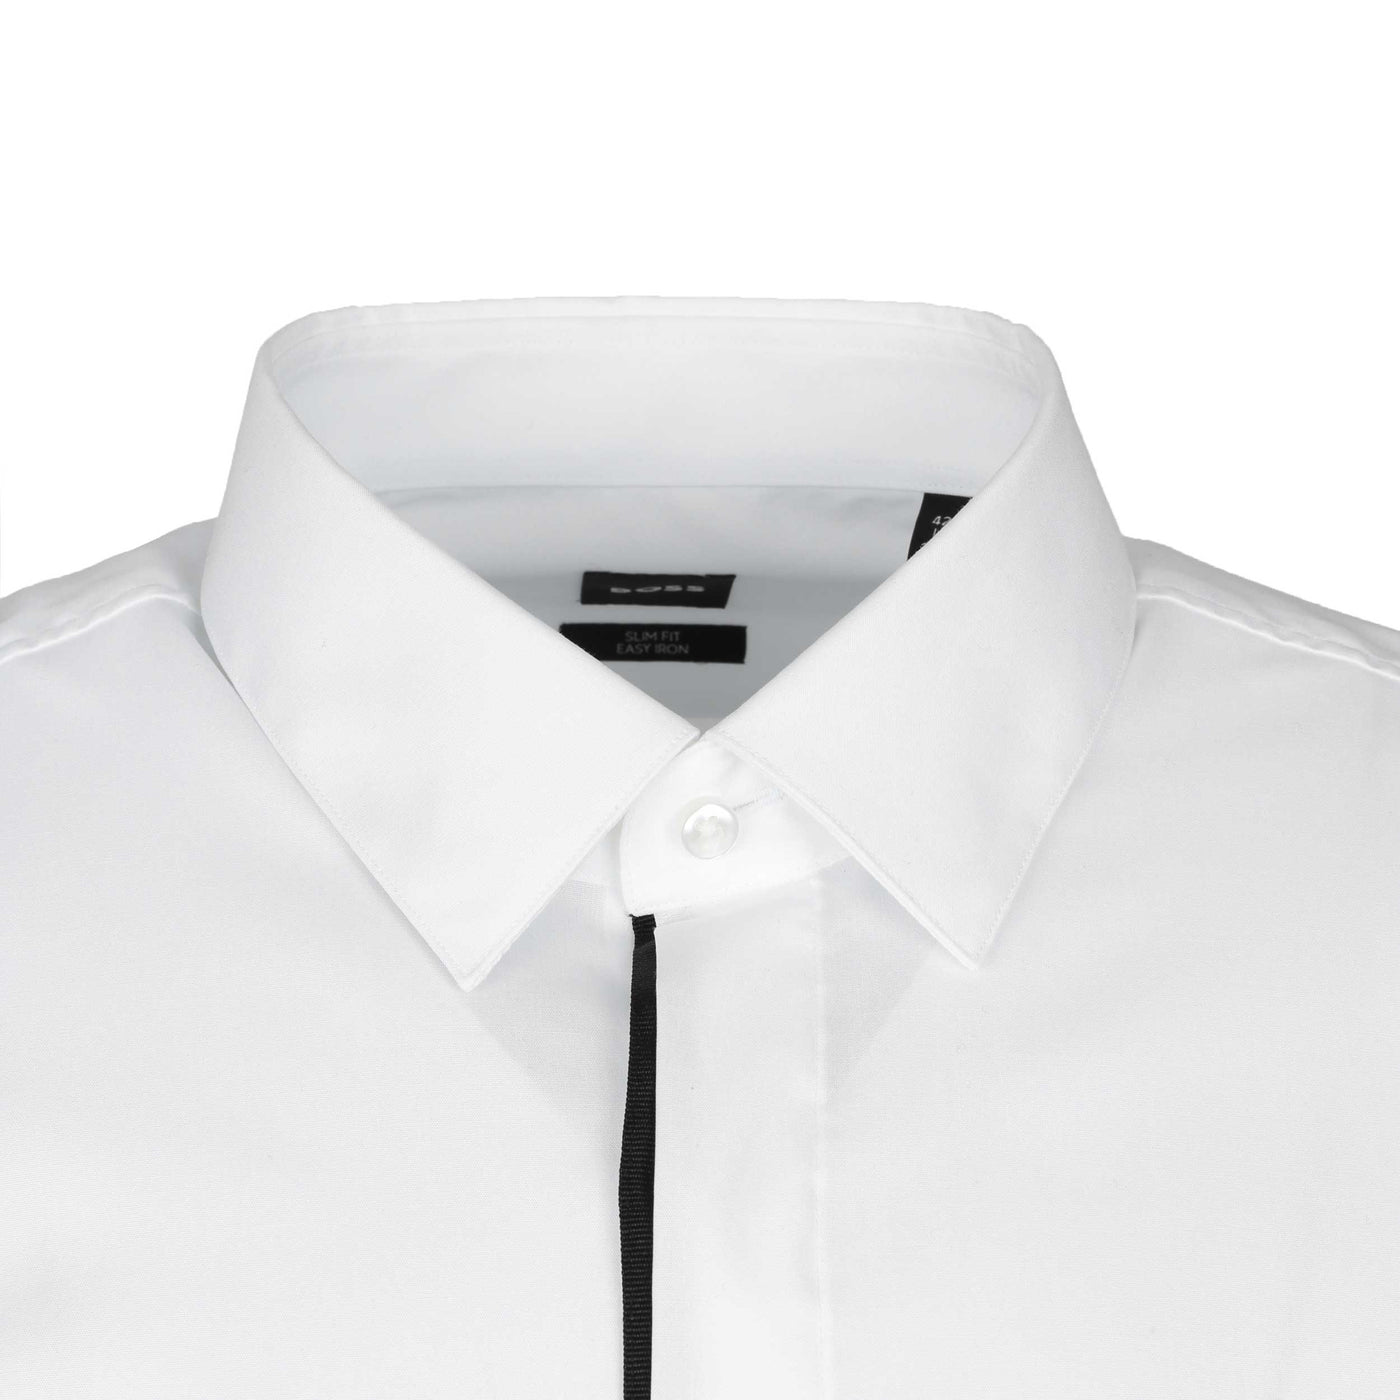 BOSS H Hank Party2 221 Shirt in White Collar